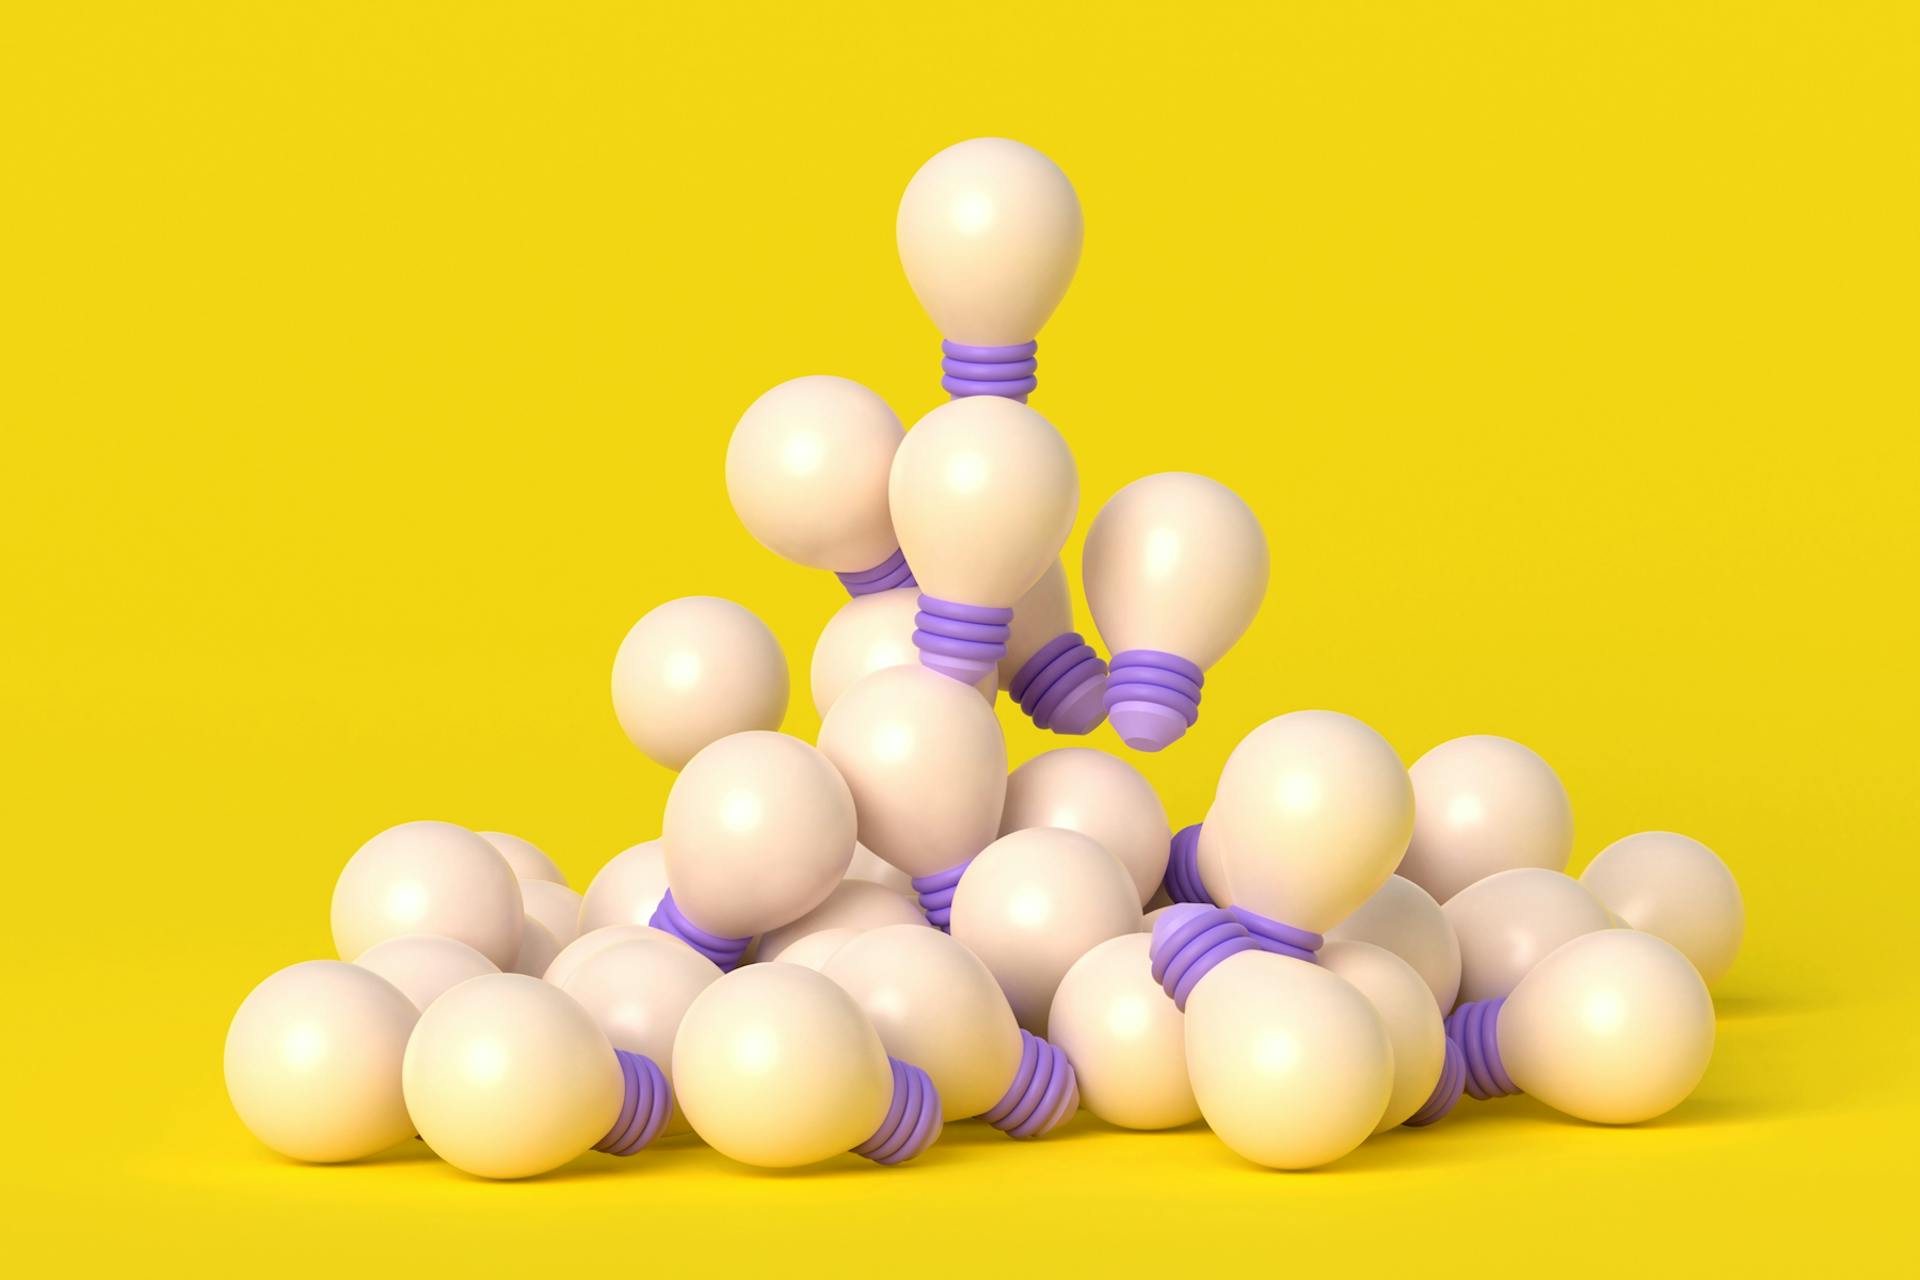 A pile of lightbulbs against a yellow background in this image for a blog about Meltwater's Devopsicon unconference.